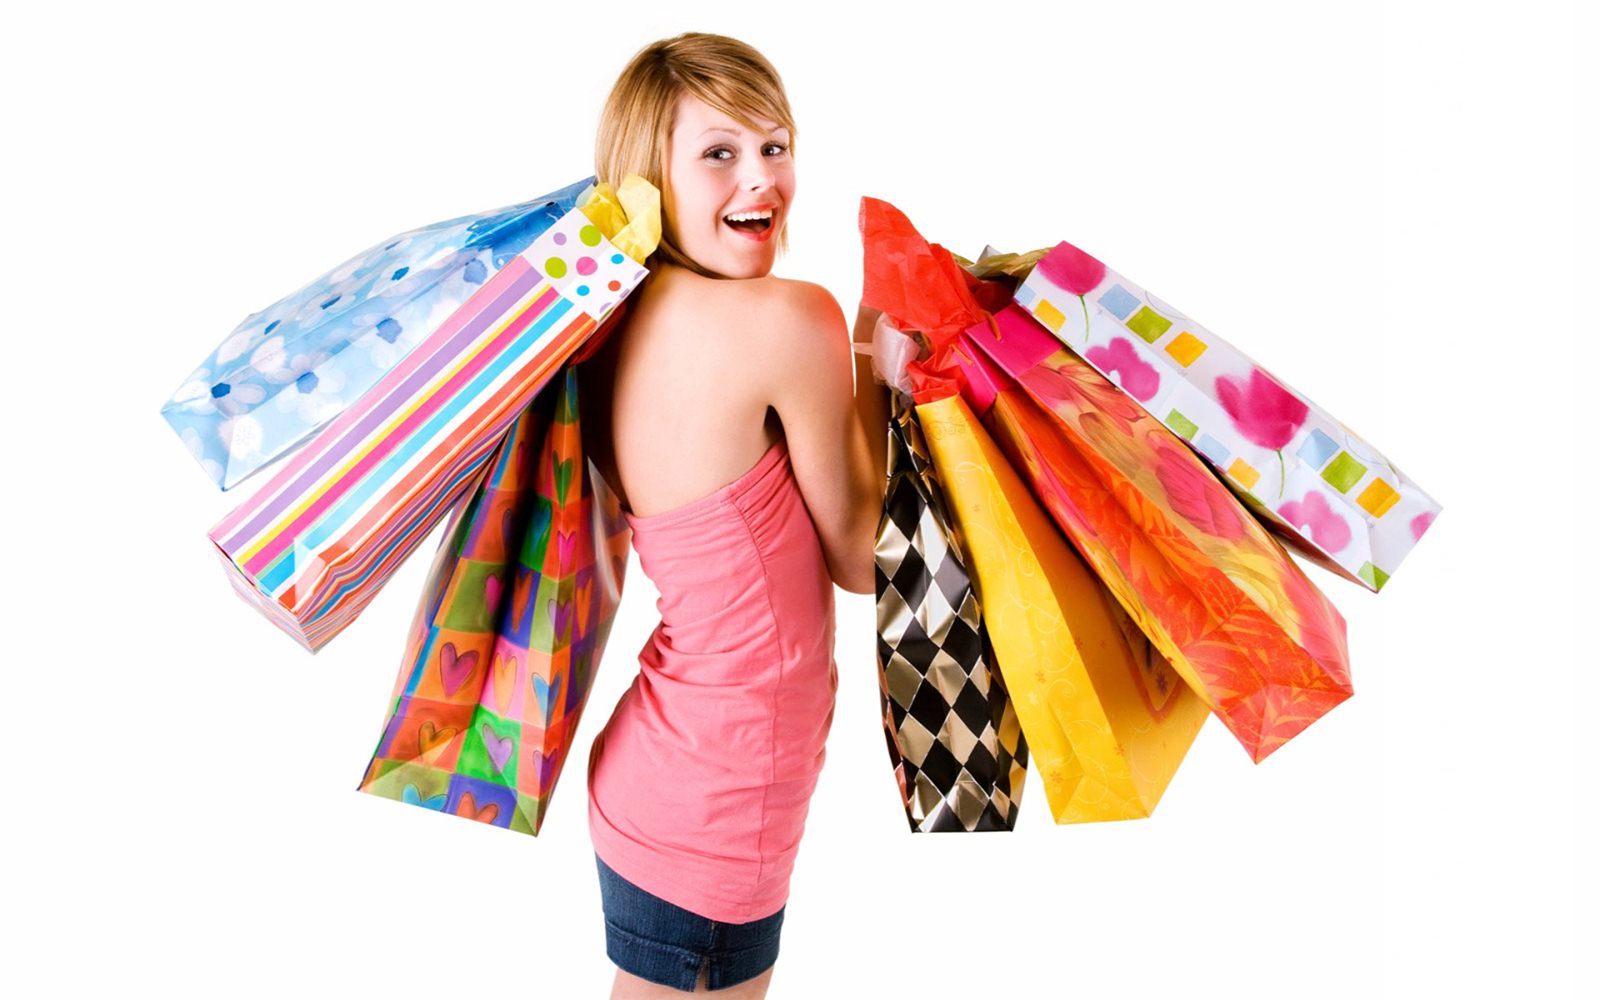 I-Love-Shopping-Girl-With-Shopping-Bags-Wallpaper